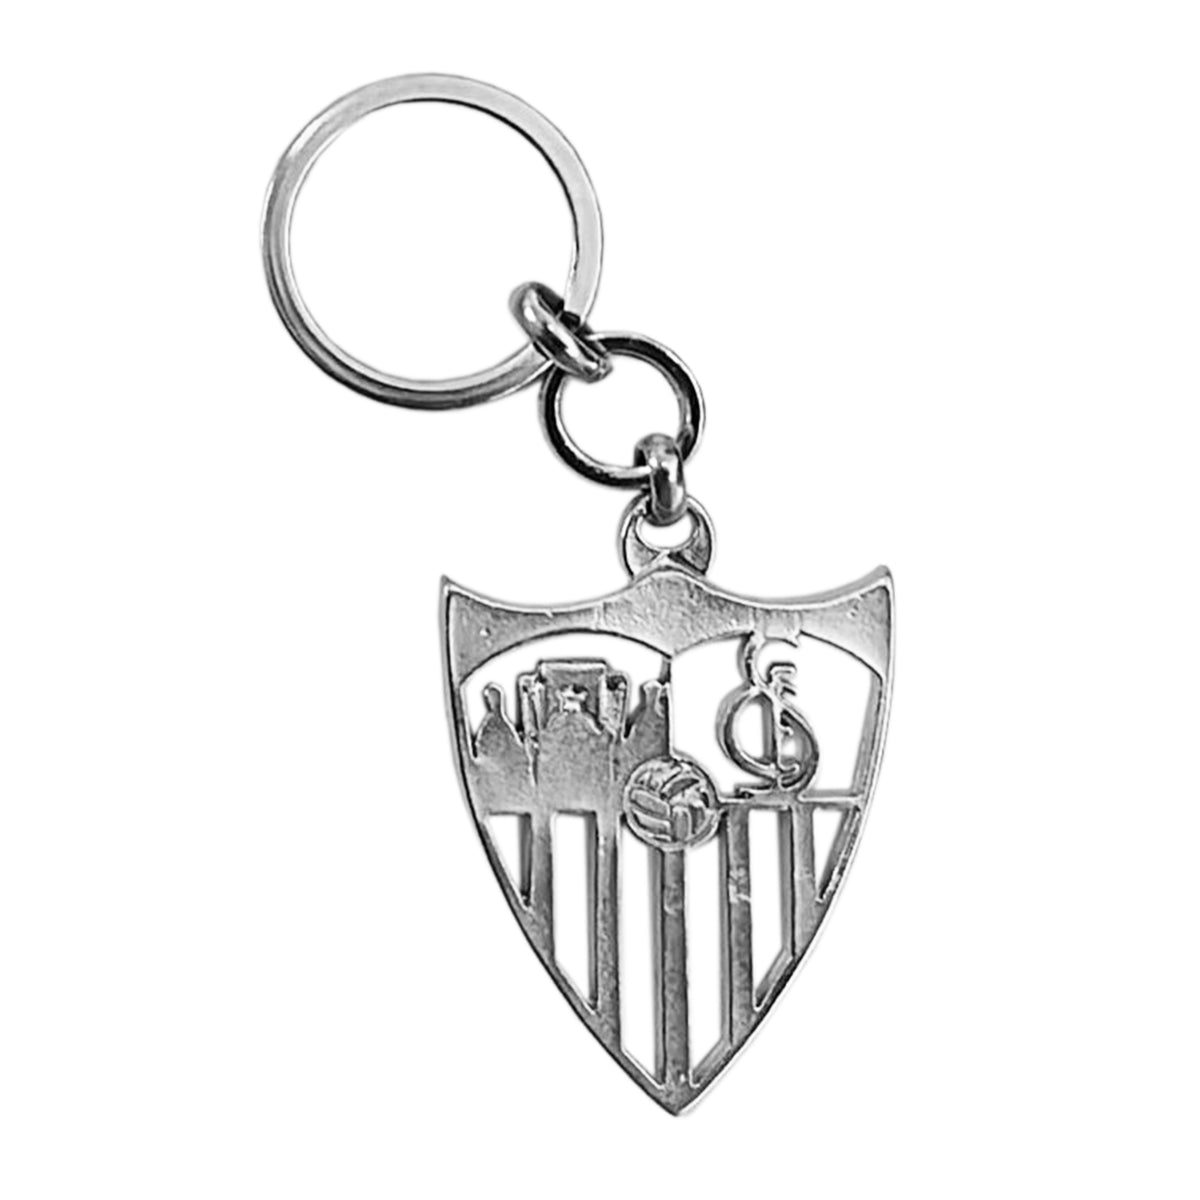 Cut-out keyring with crest